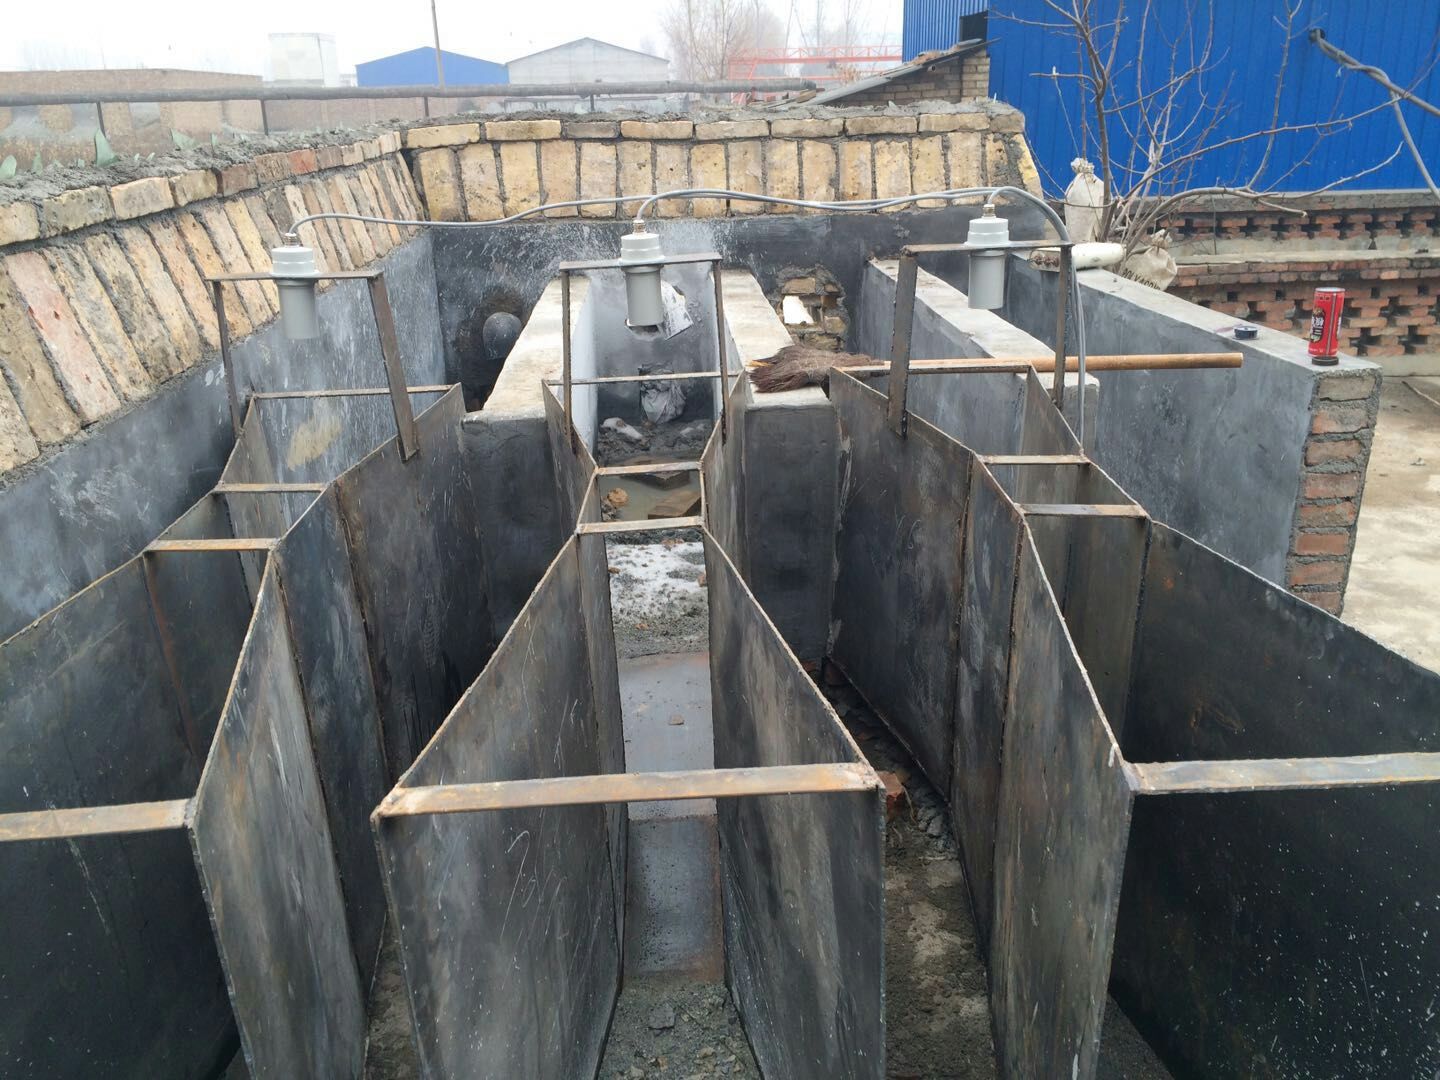 Parshall flume Open channel flow meter installation and precautions